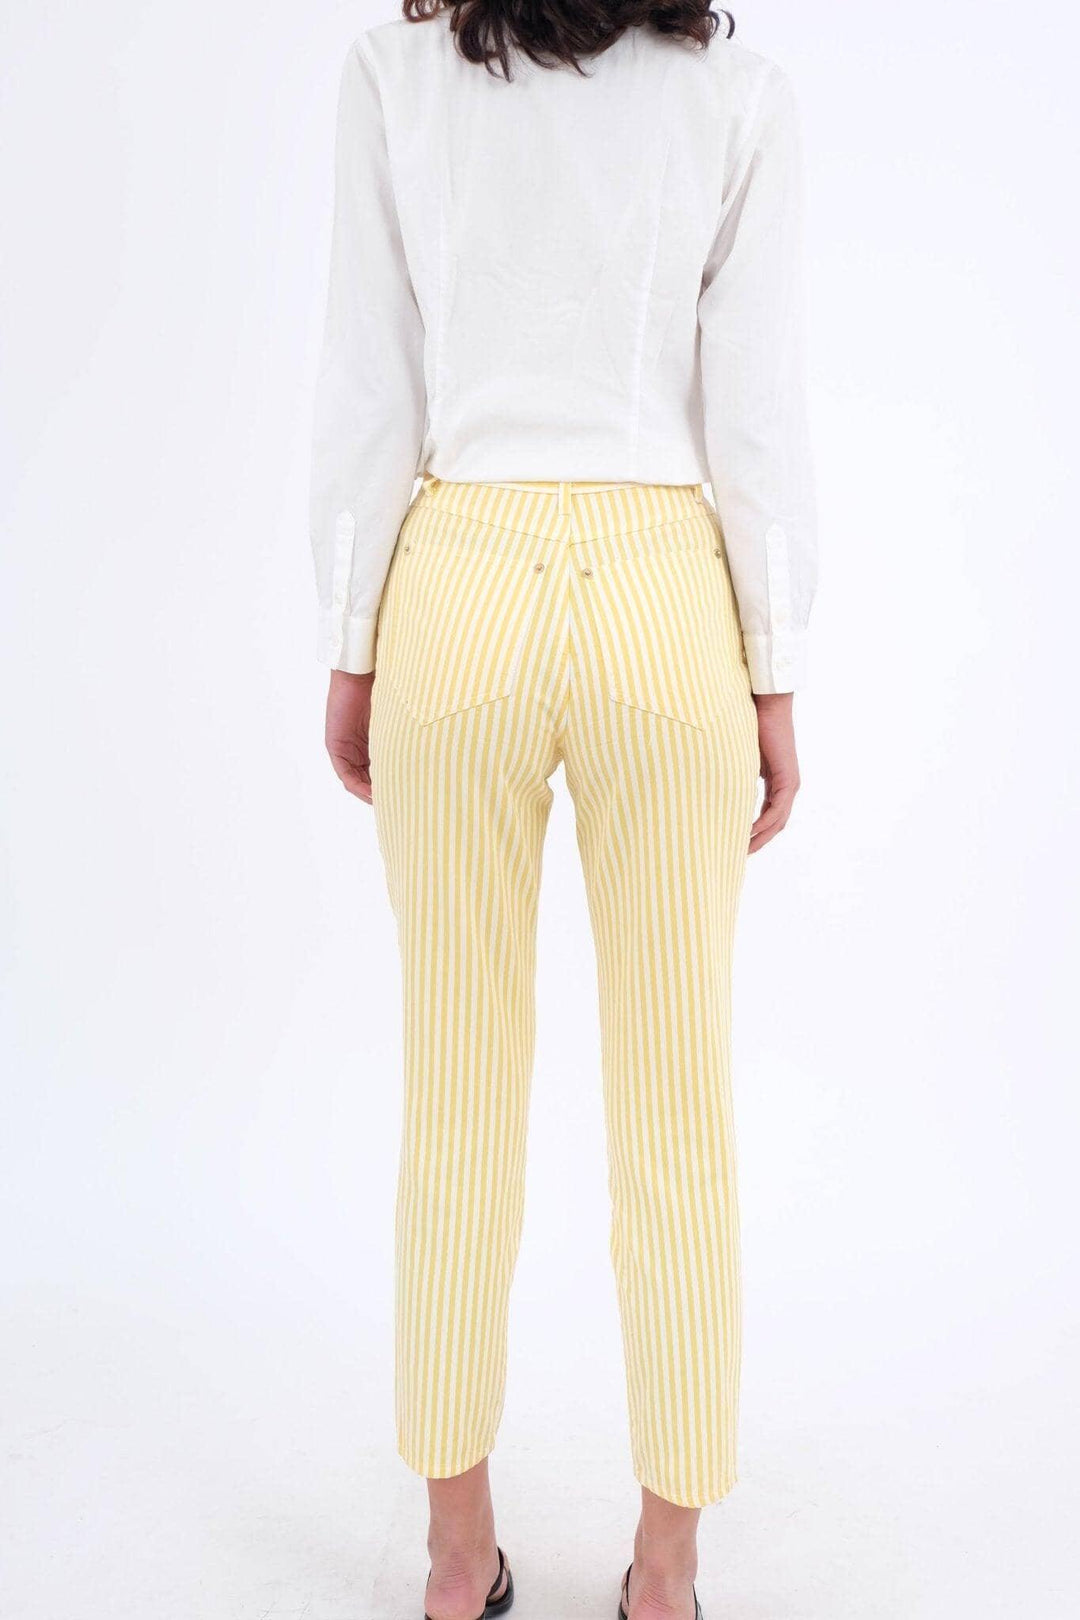 High waisted striped pants - Volver